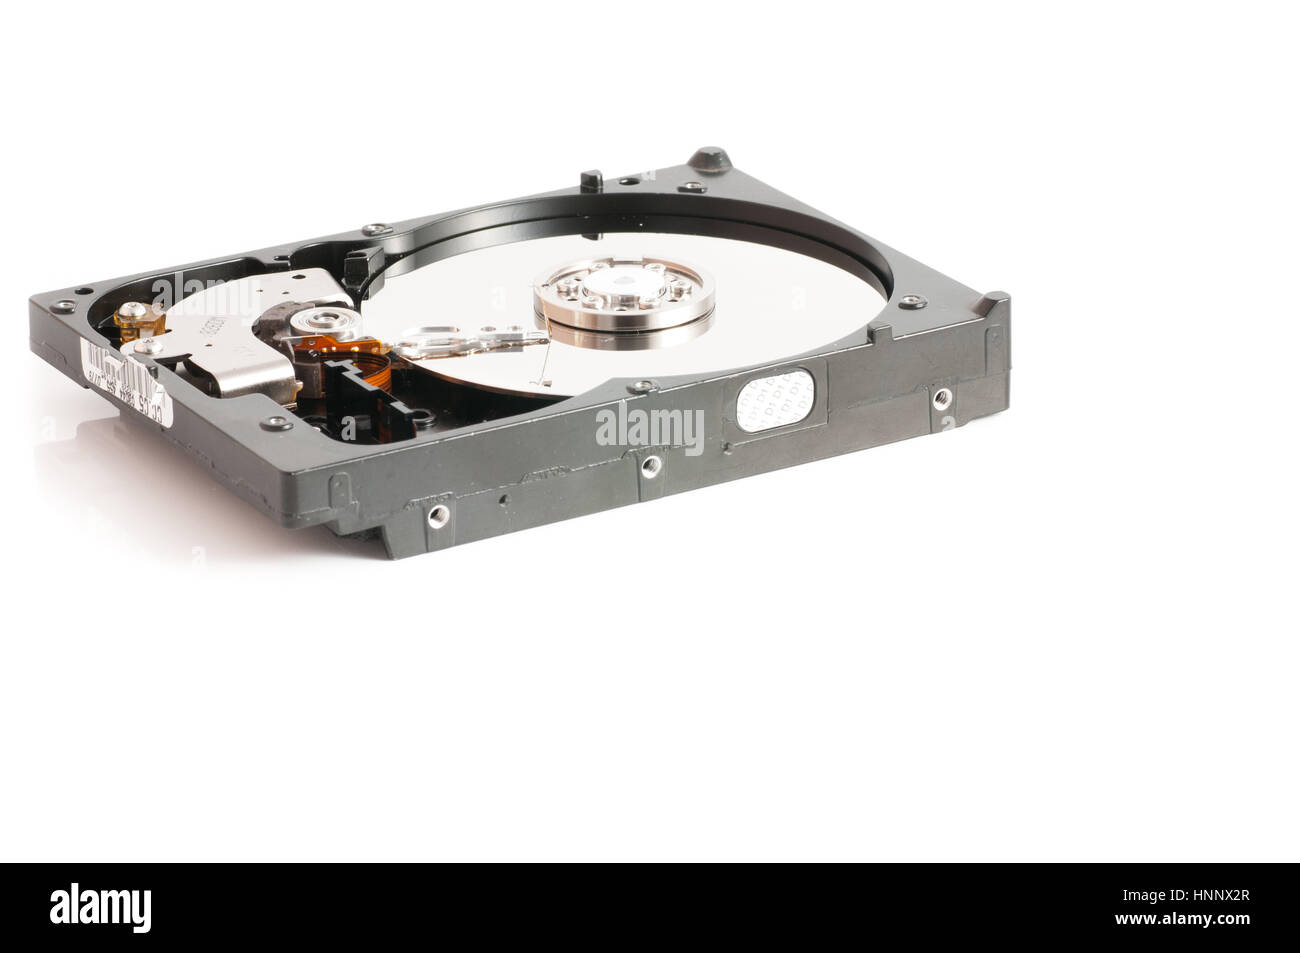 hard disk drives 3.5 inches Stock Photo